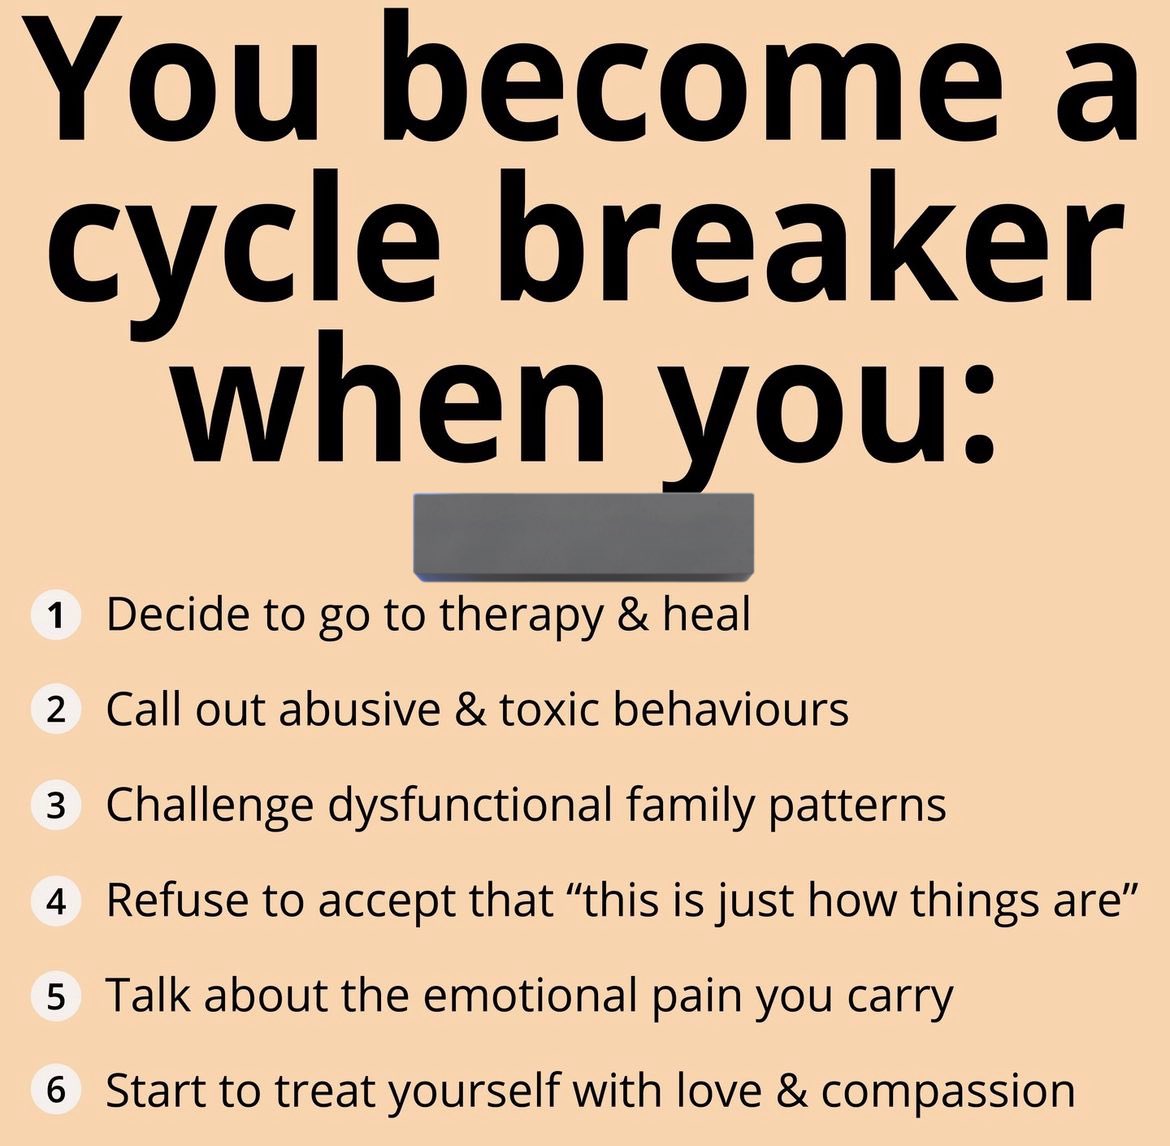 It’s not easy but someone’s gotta do it #breakthecycle #loveheals